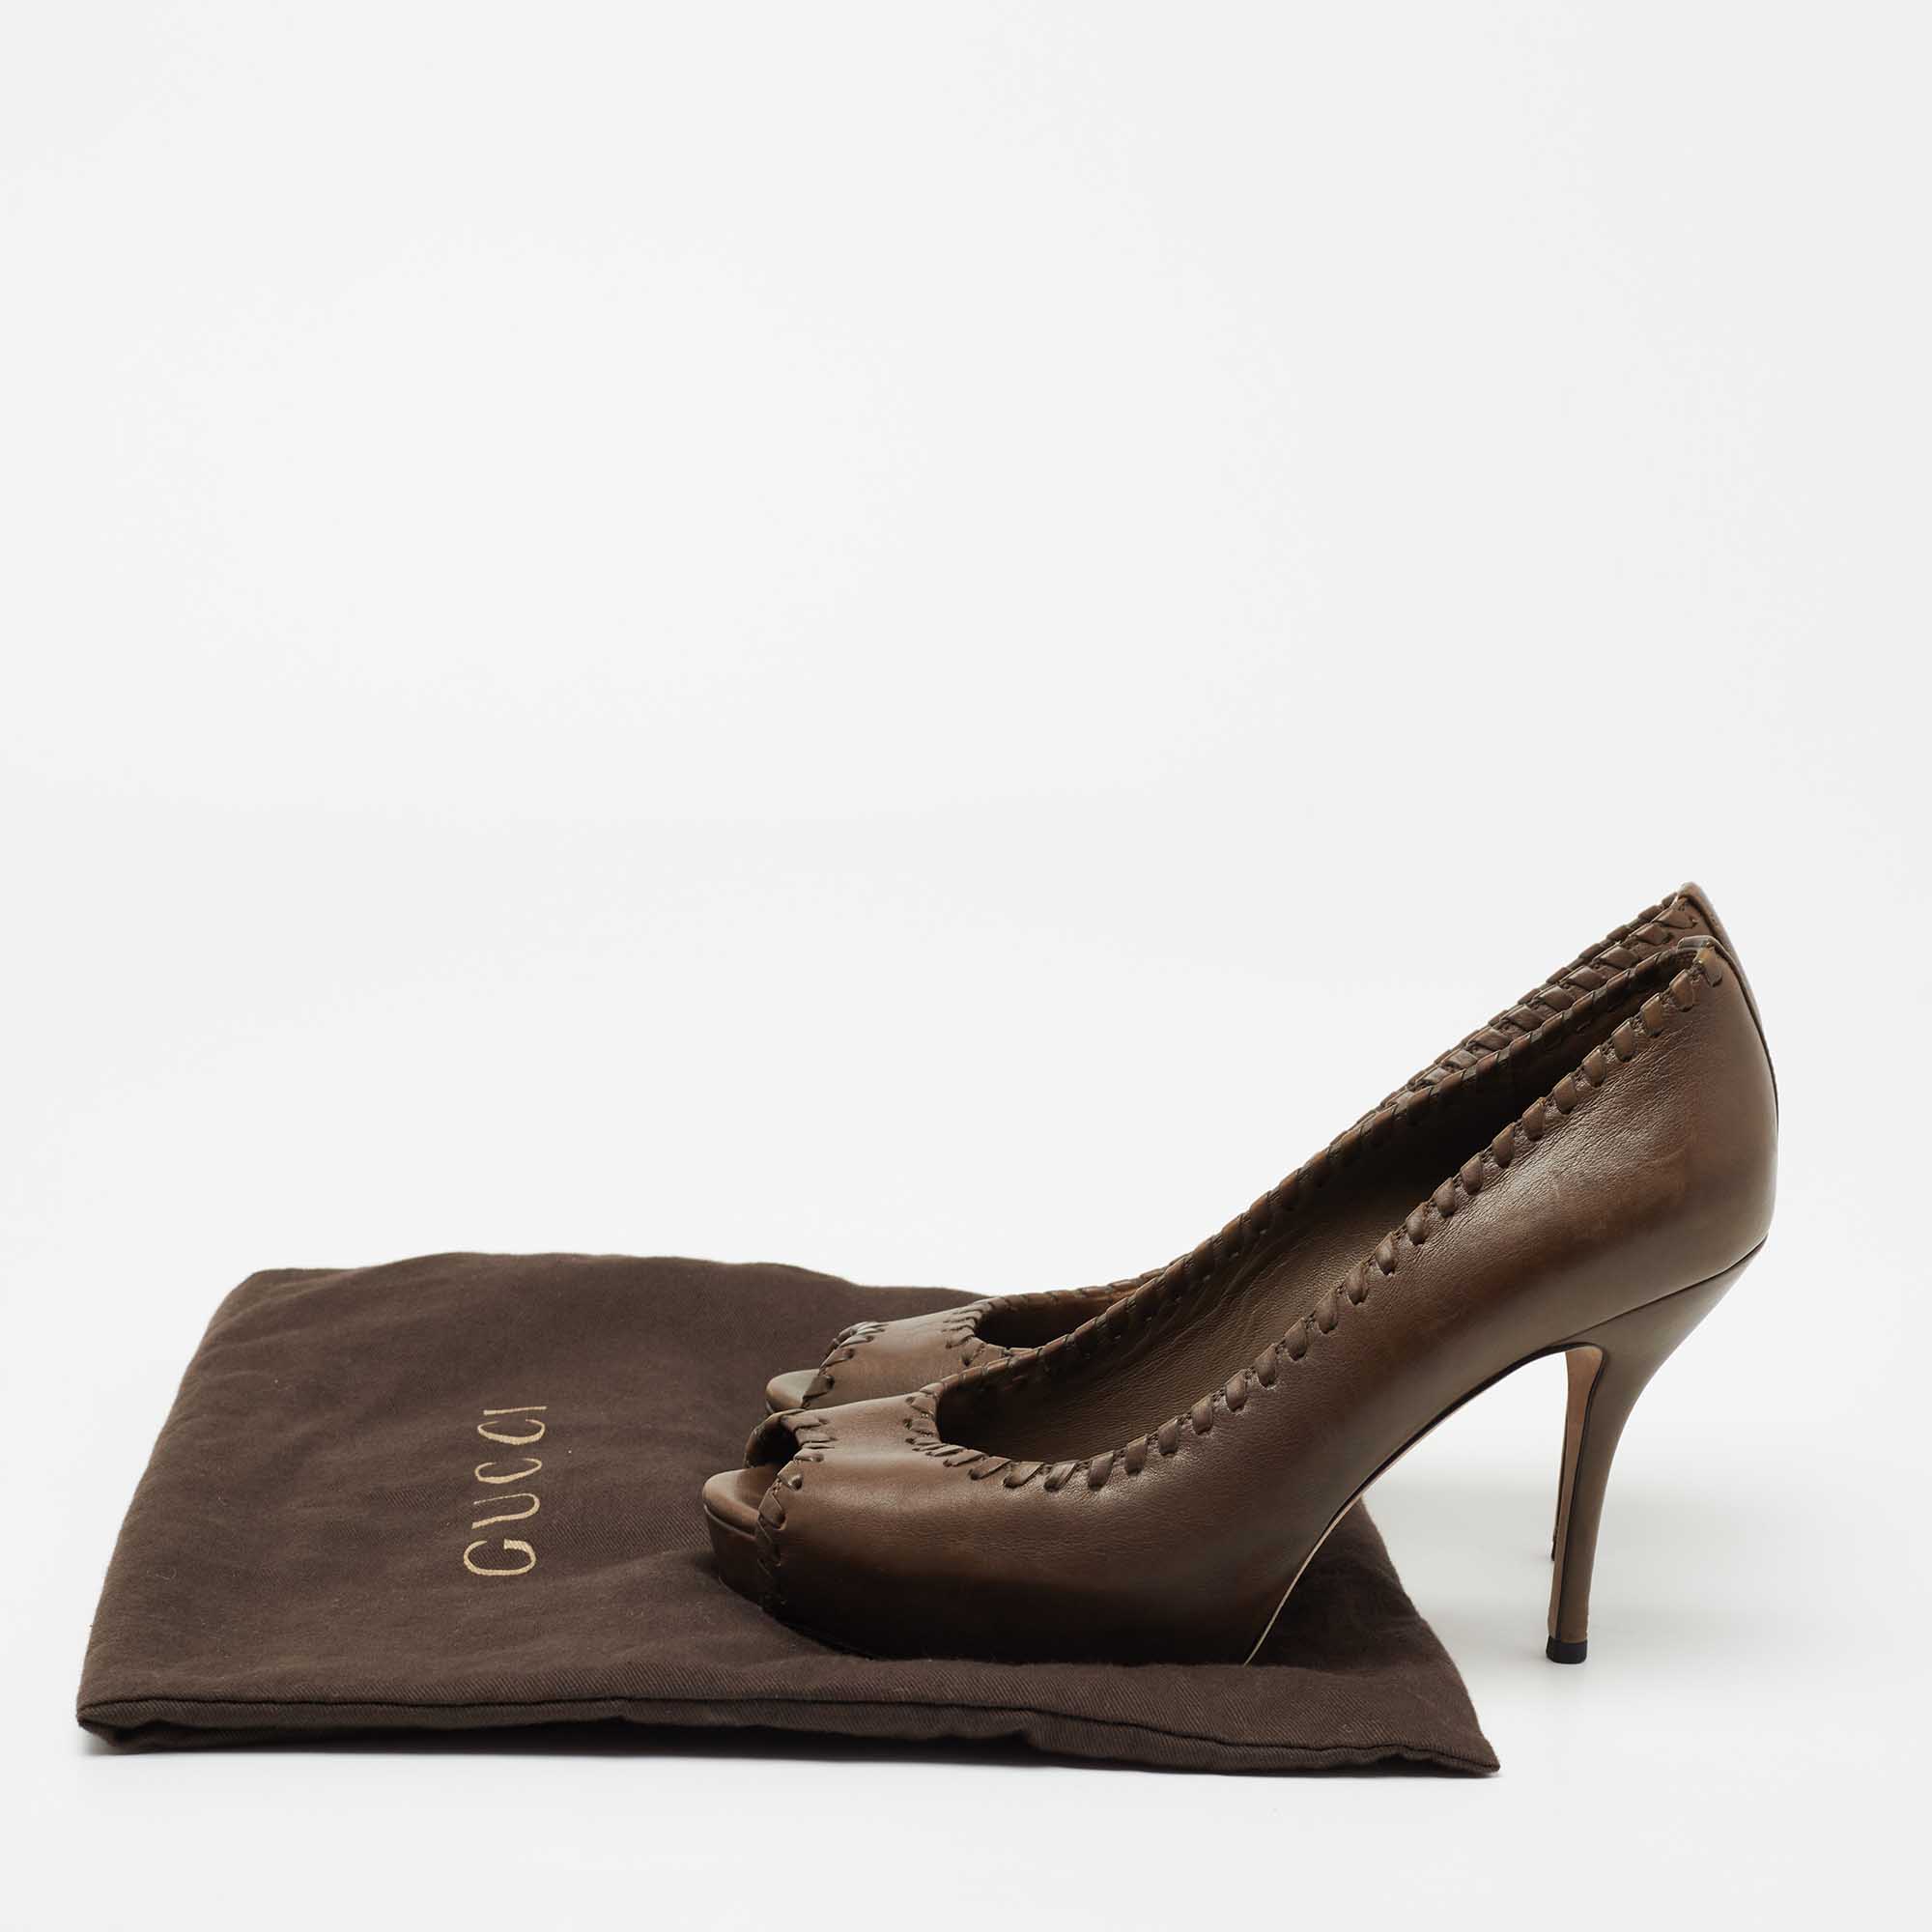 Gucci Brown Leather Whipstitch Peep Toe Platform Pumps Size 38